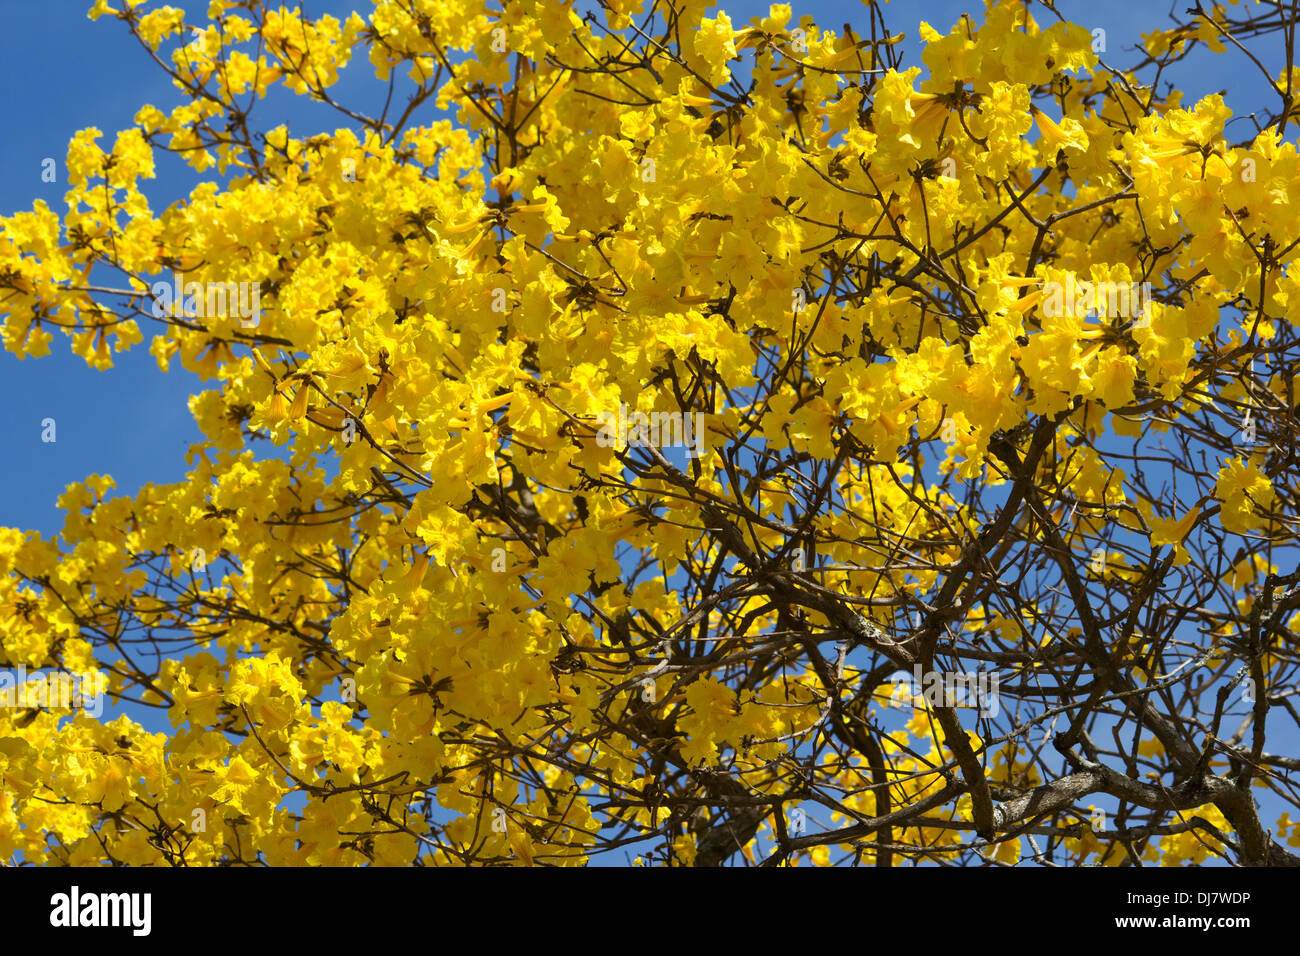 (Tabebuia chrysotricha) Golden trumpet tree blossoms against blue sky Stock Photo